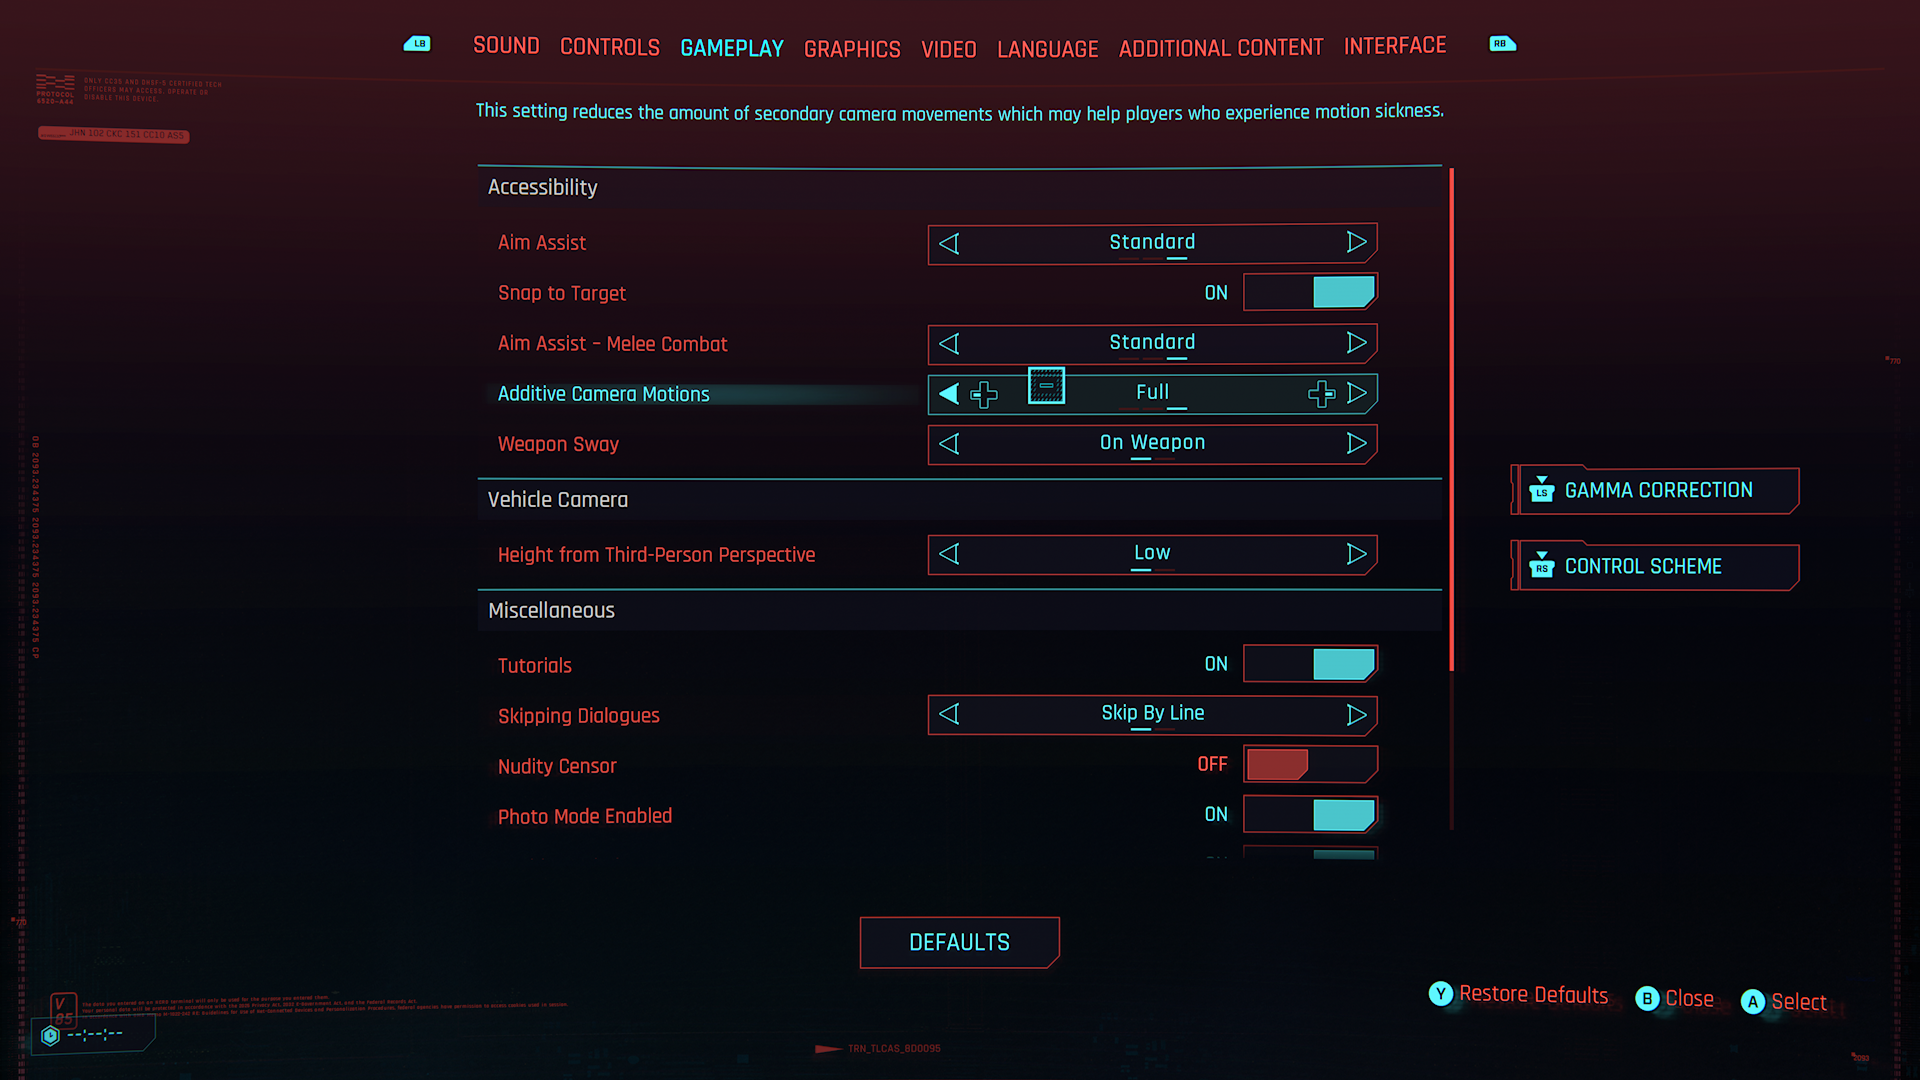 Cyberpunk 2077 screenshot of accessibility menu under game play settings. The focus is on the "additive camera motions" option and is set to "full."